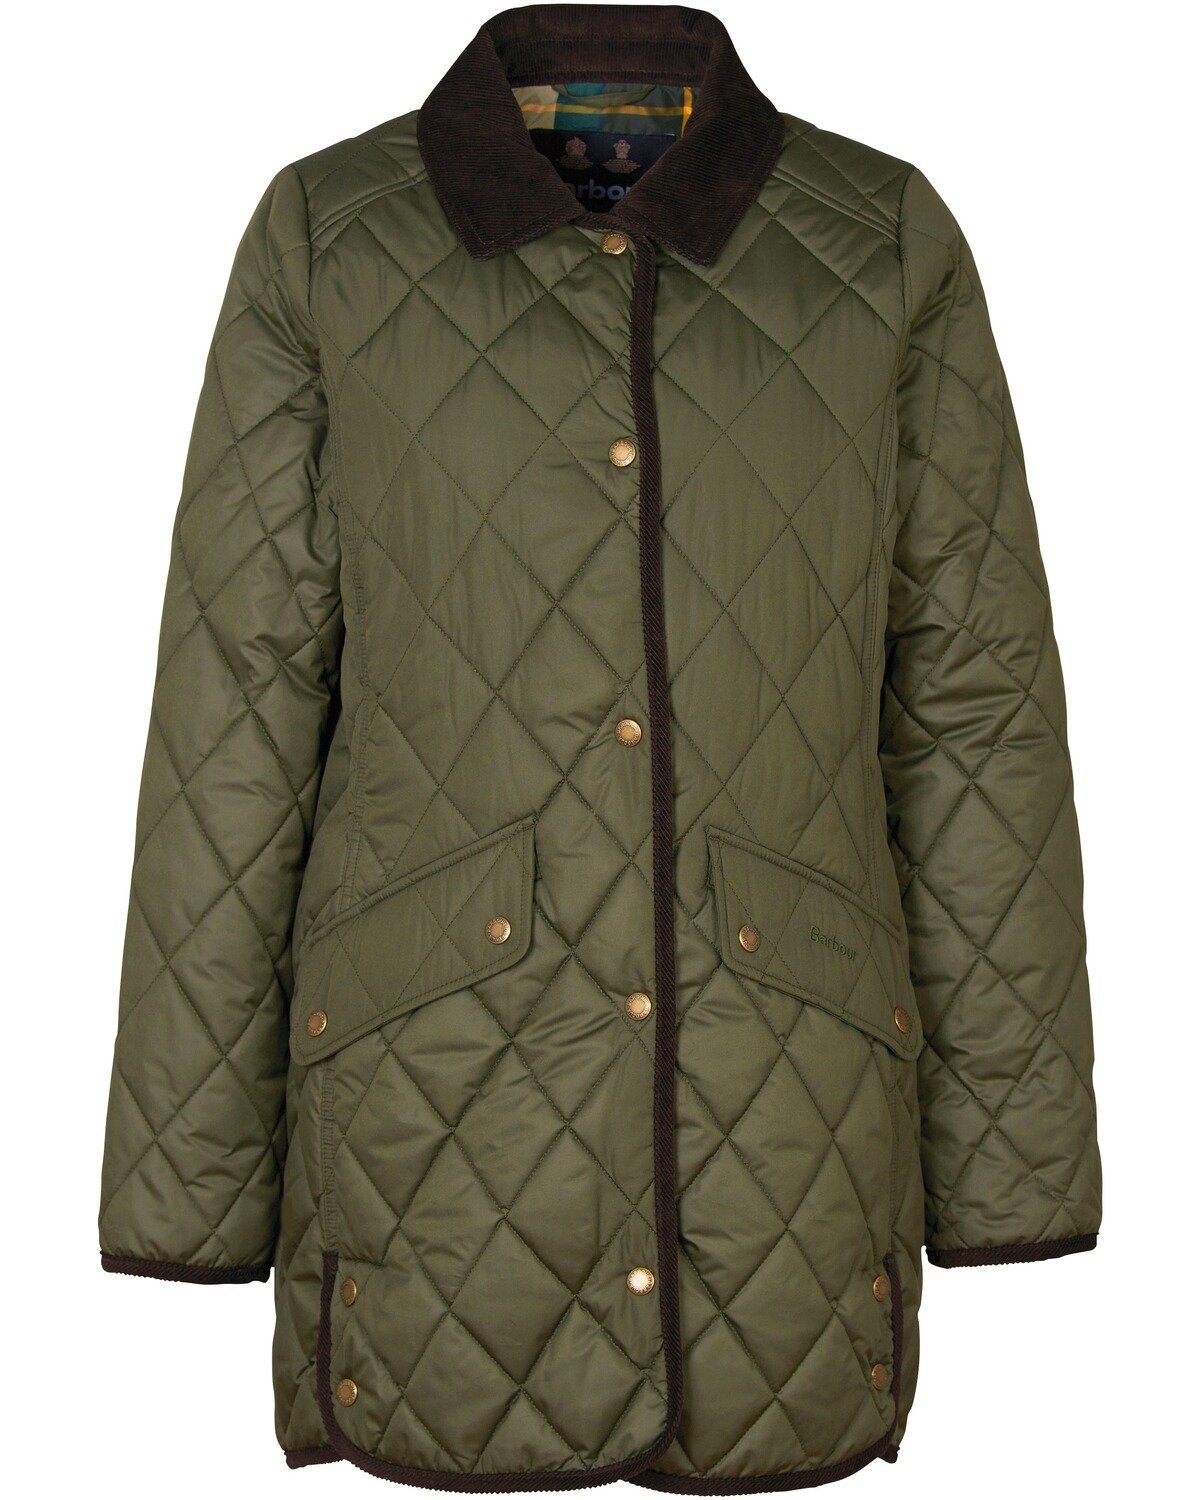 Barbour Steppjacke Steppjacke Long Cavalry Olive/Ancient